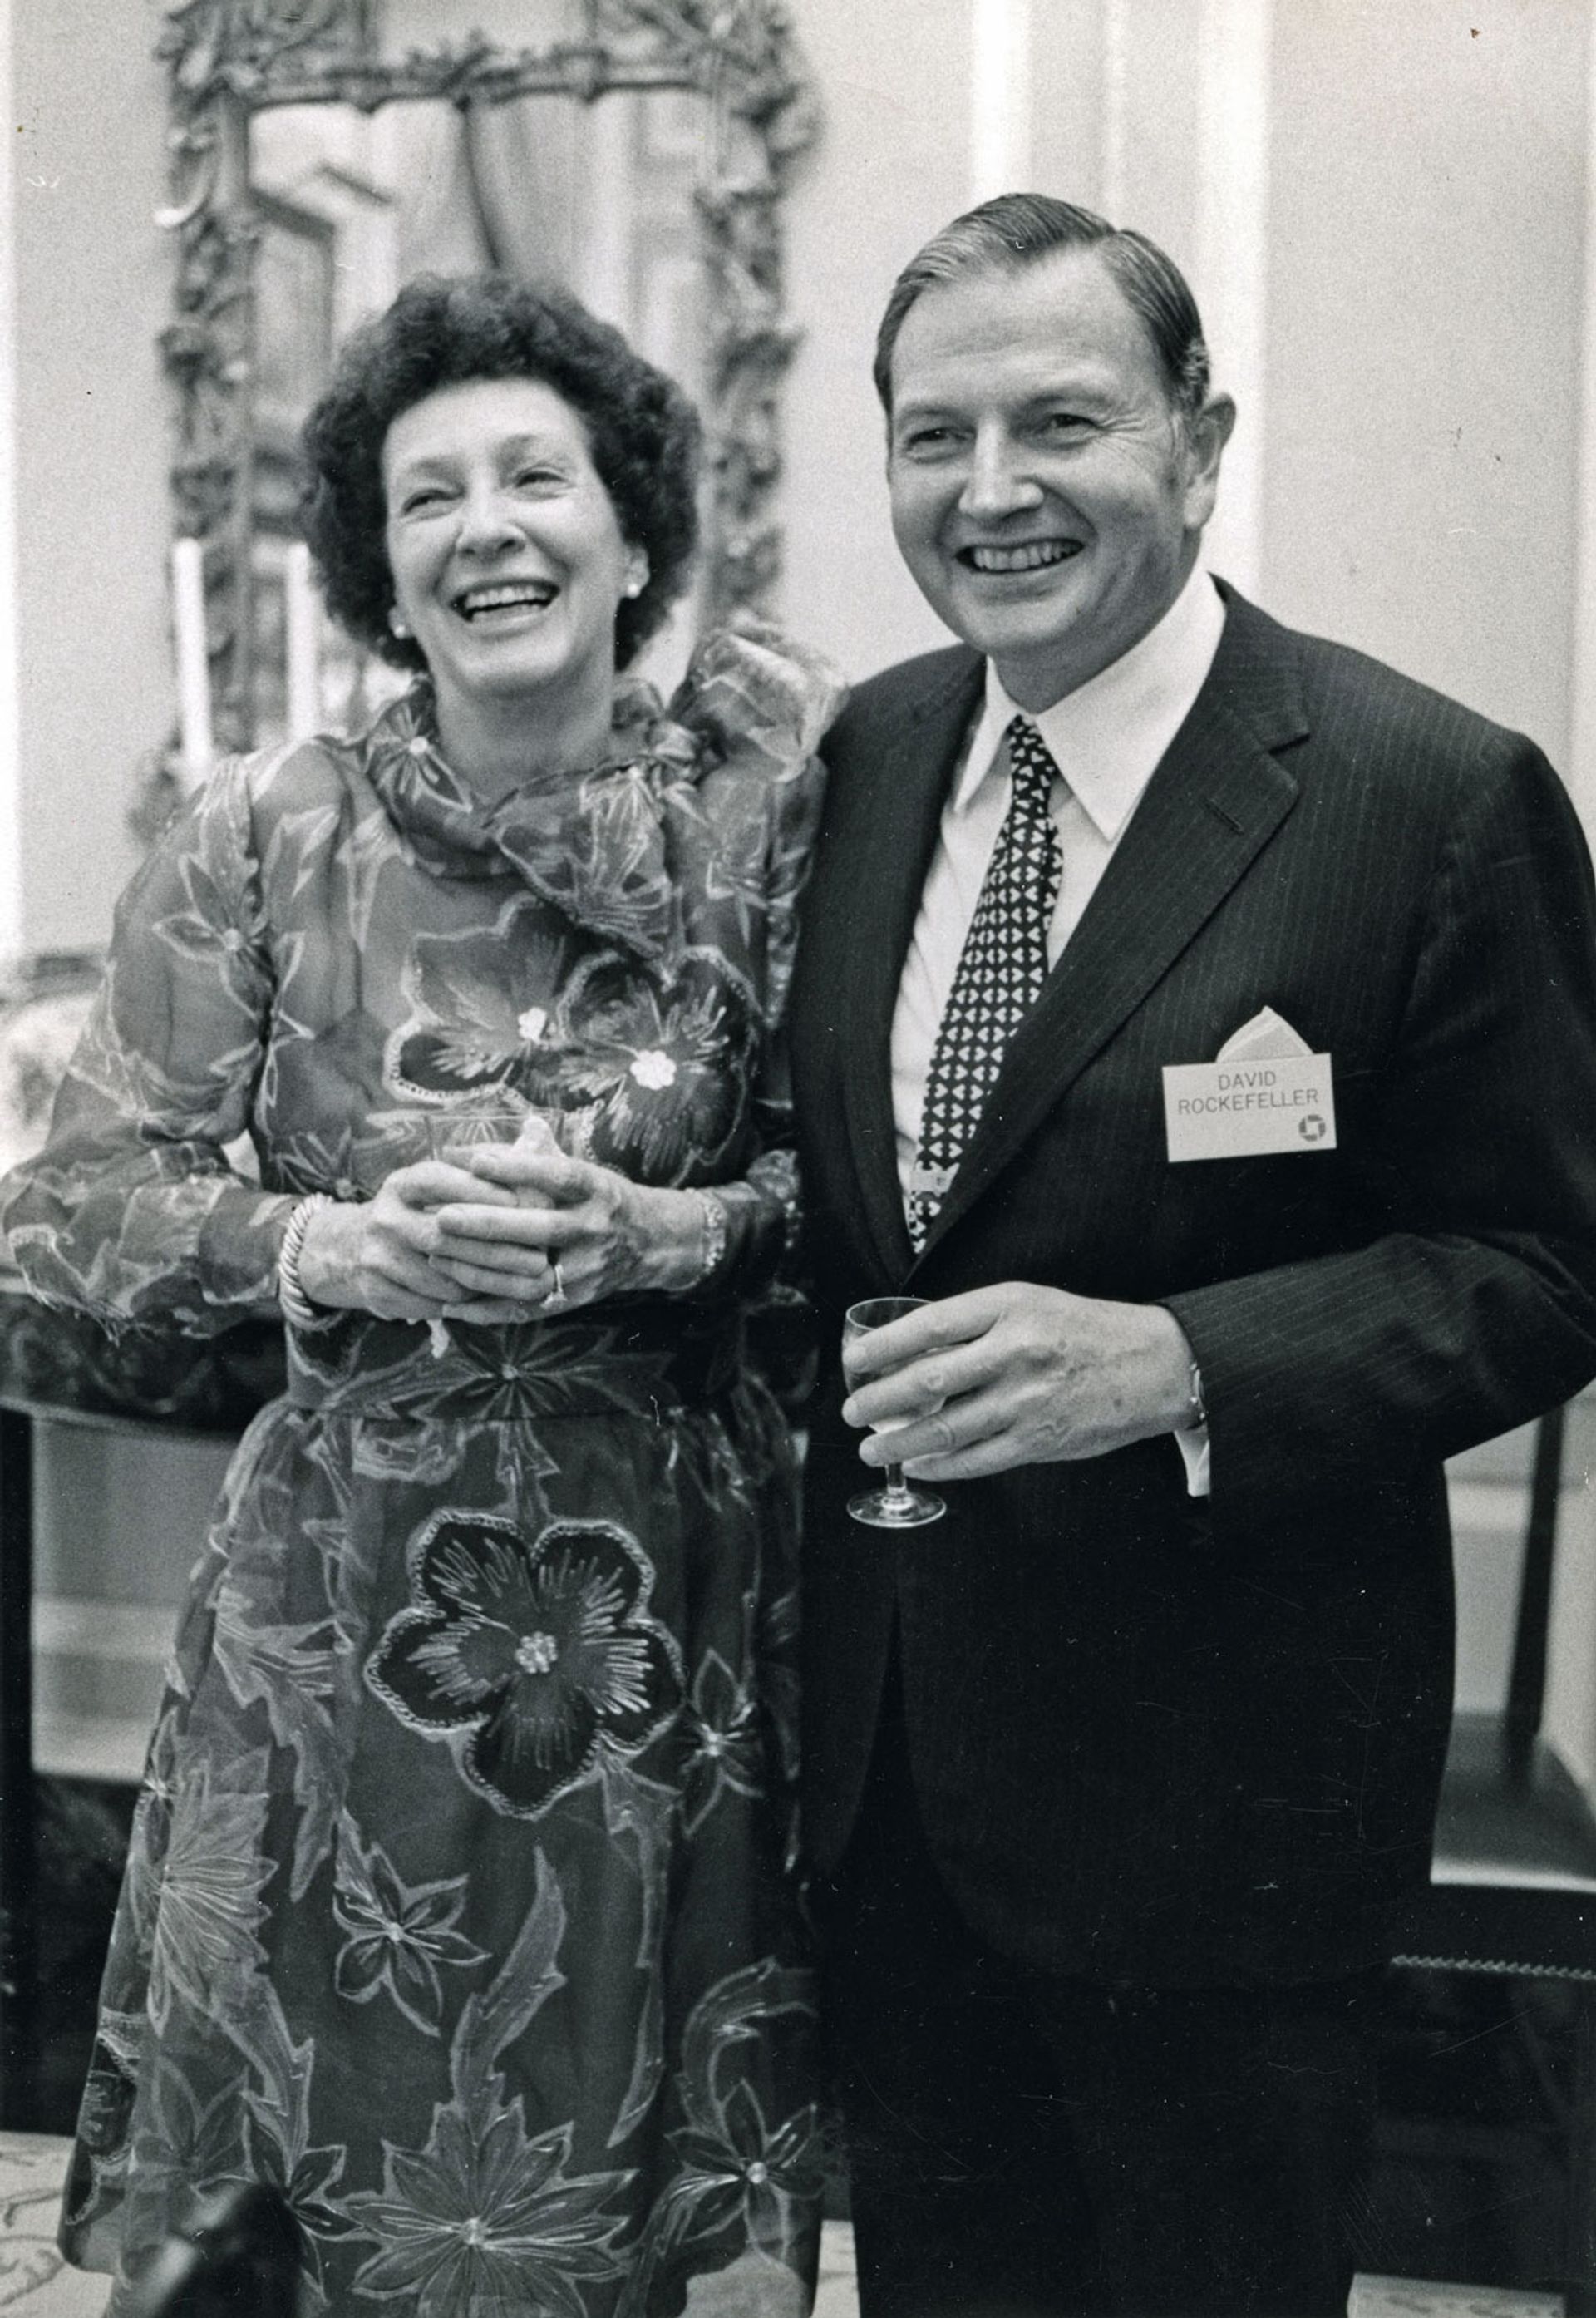 David and Peggy Rockefeller in 1973 Courtesy of the Rockefeller Archive Centre